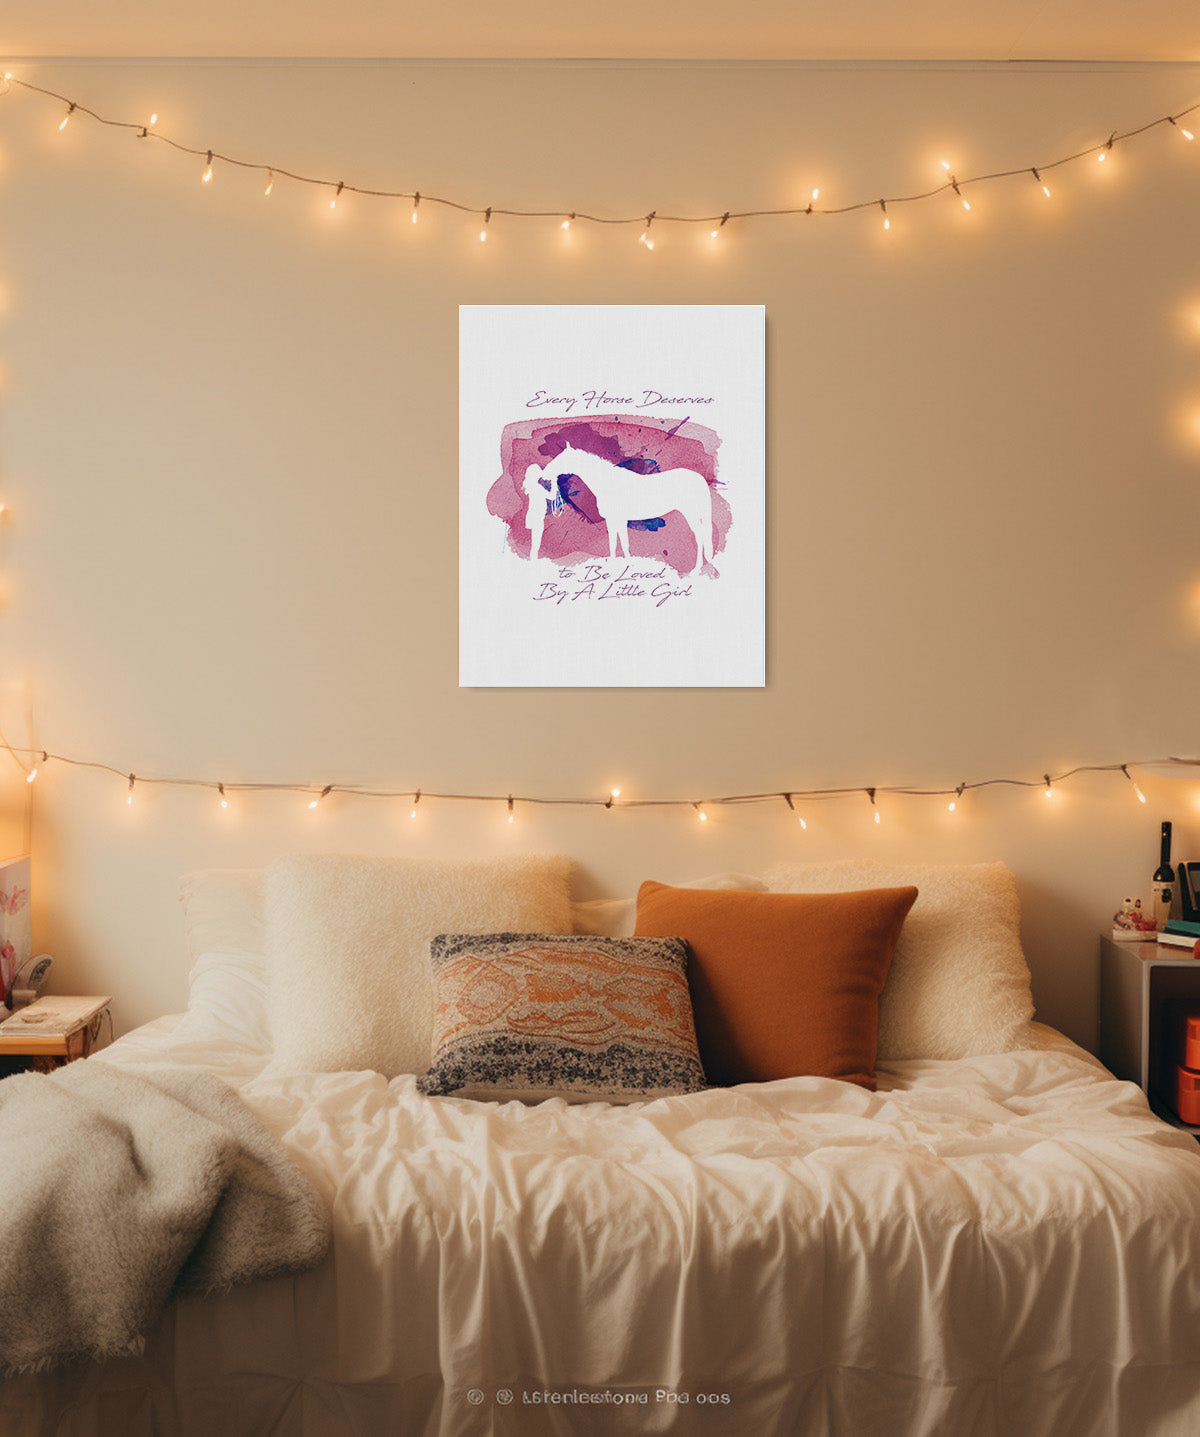 Every Horse Deserves To Be Loved By A Little Girl - Cute Horse Wall Art Decor Print with a white background - artwork printed on canvas